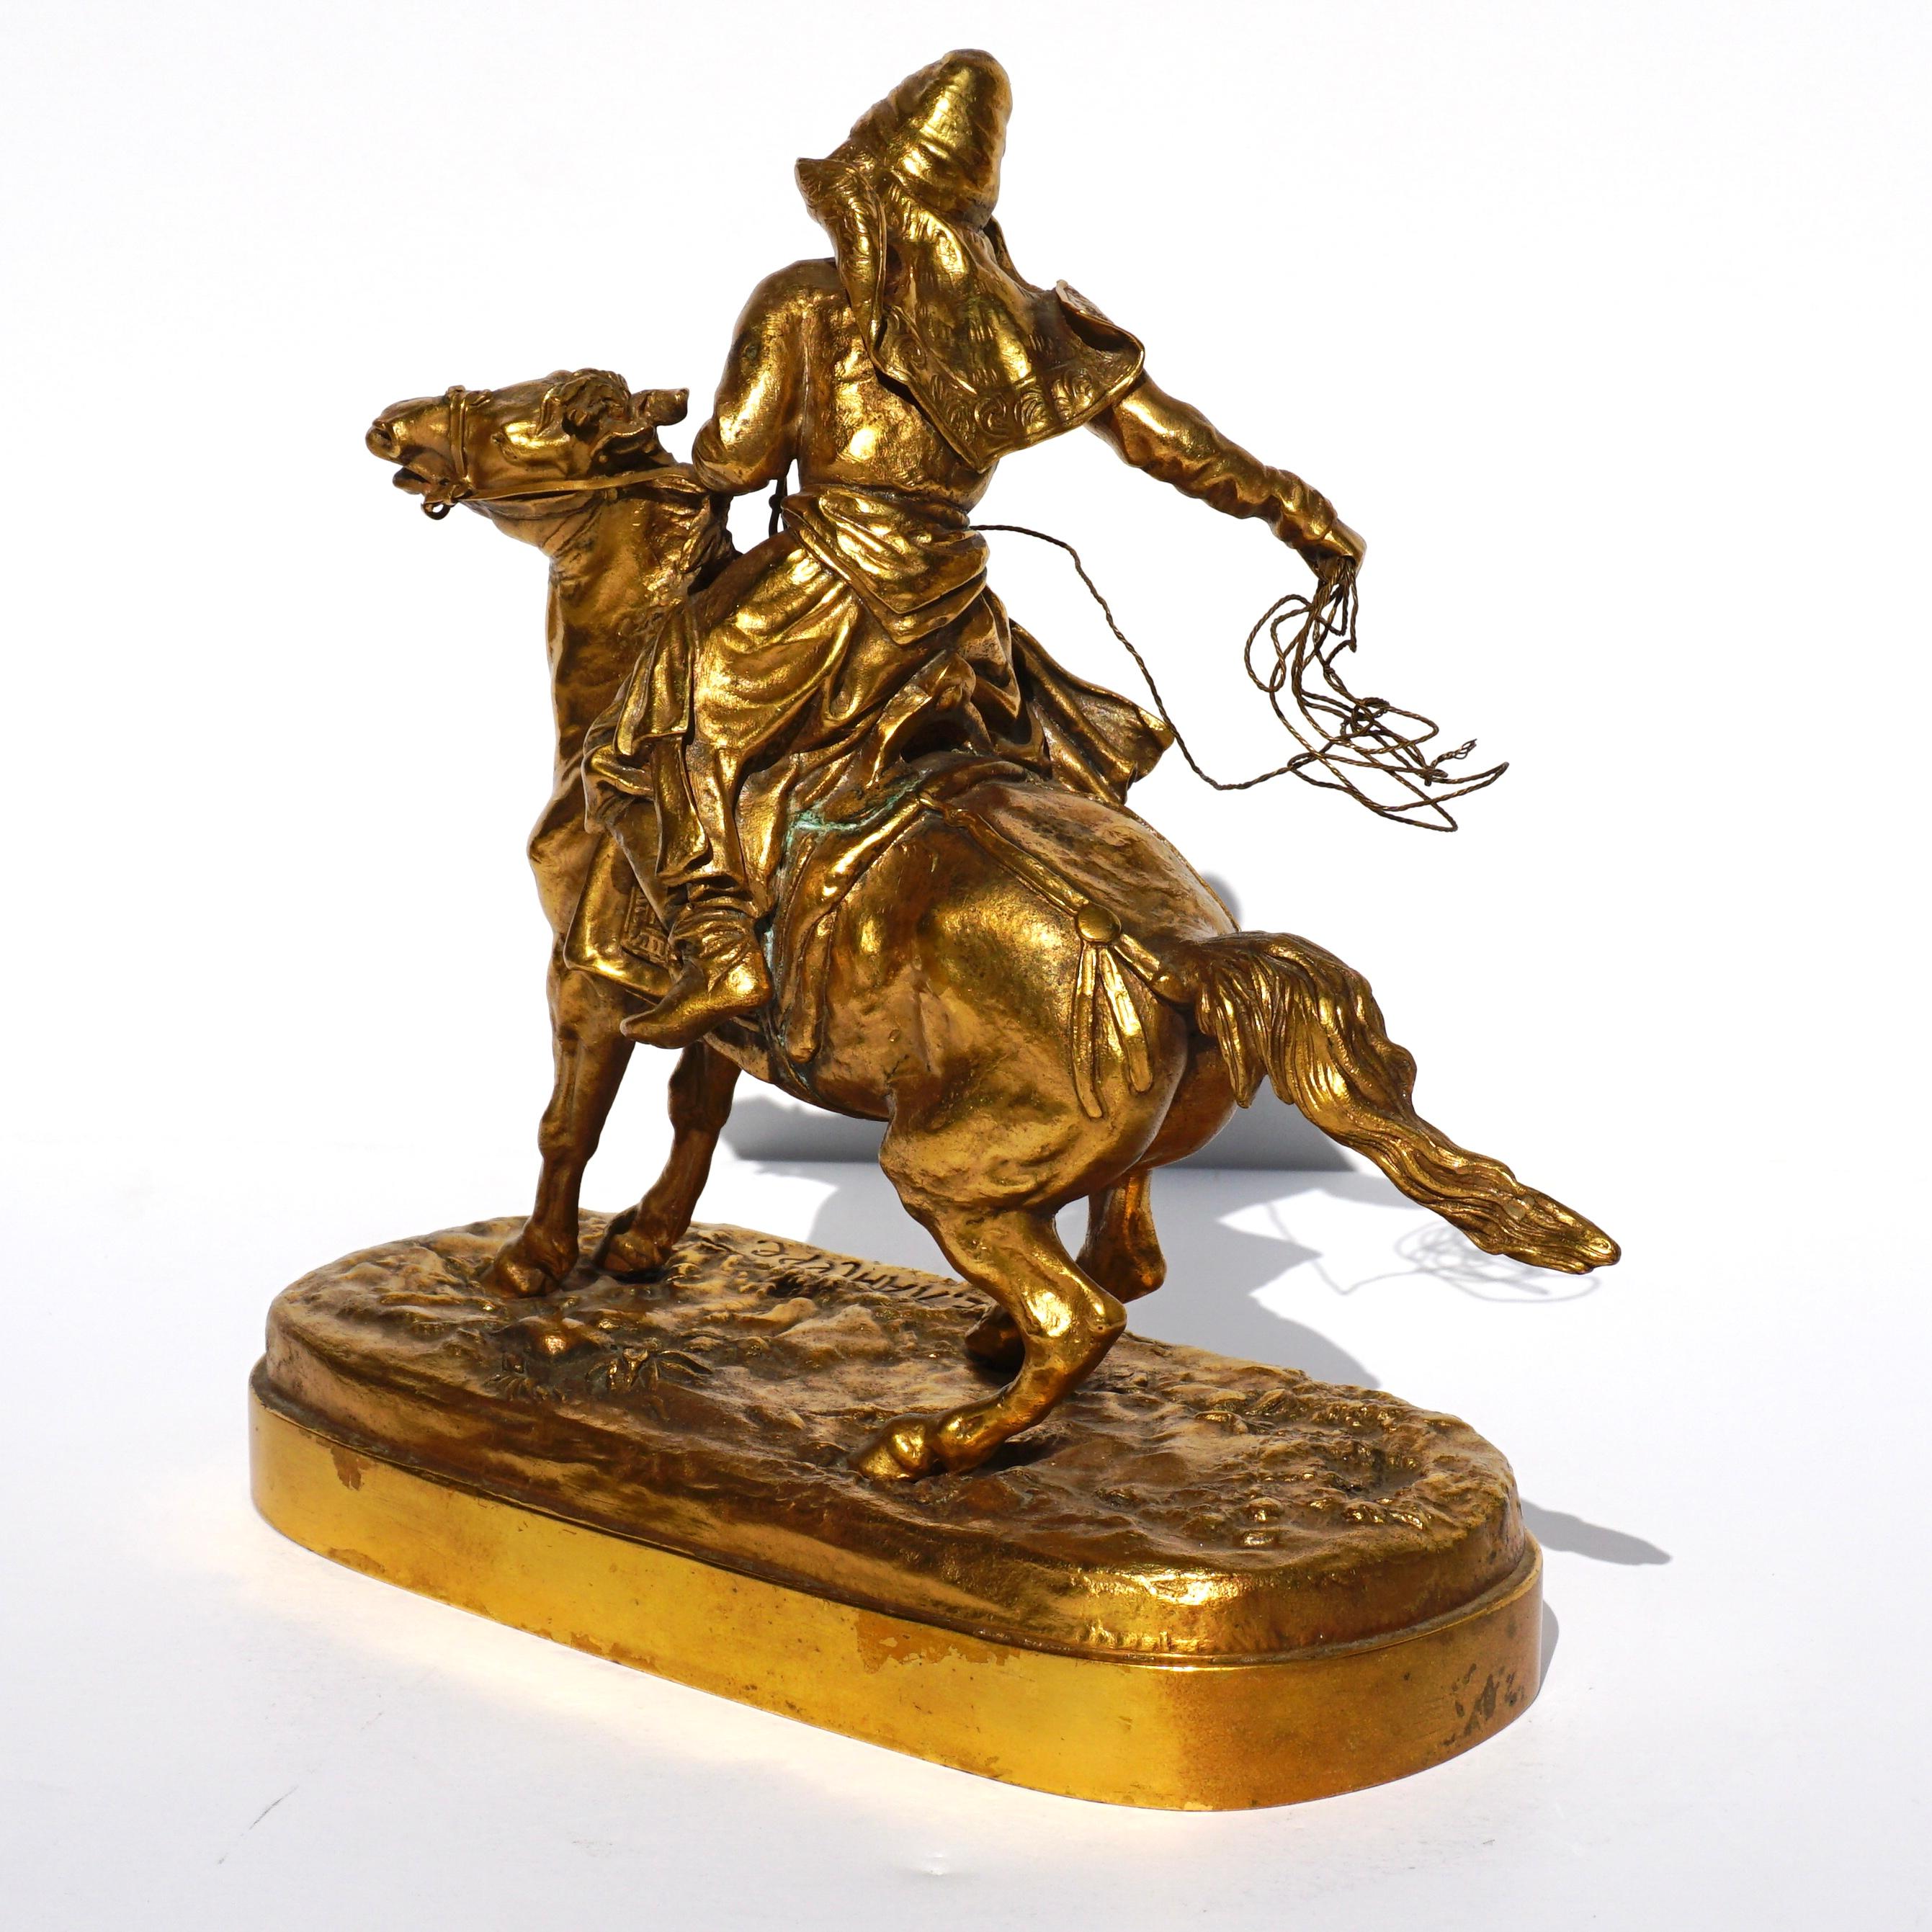 Late 19th Century Eugene Alexandrovich Lanceray (Russian, 1848-1886) Cossack on Horse For Sale